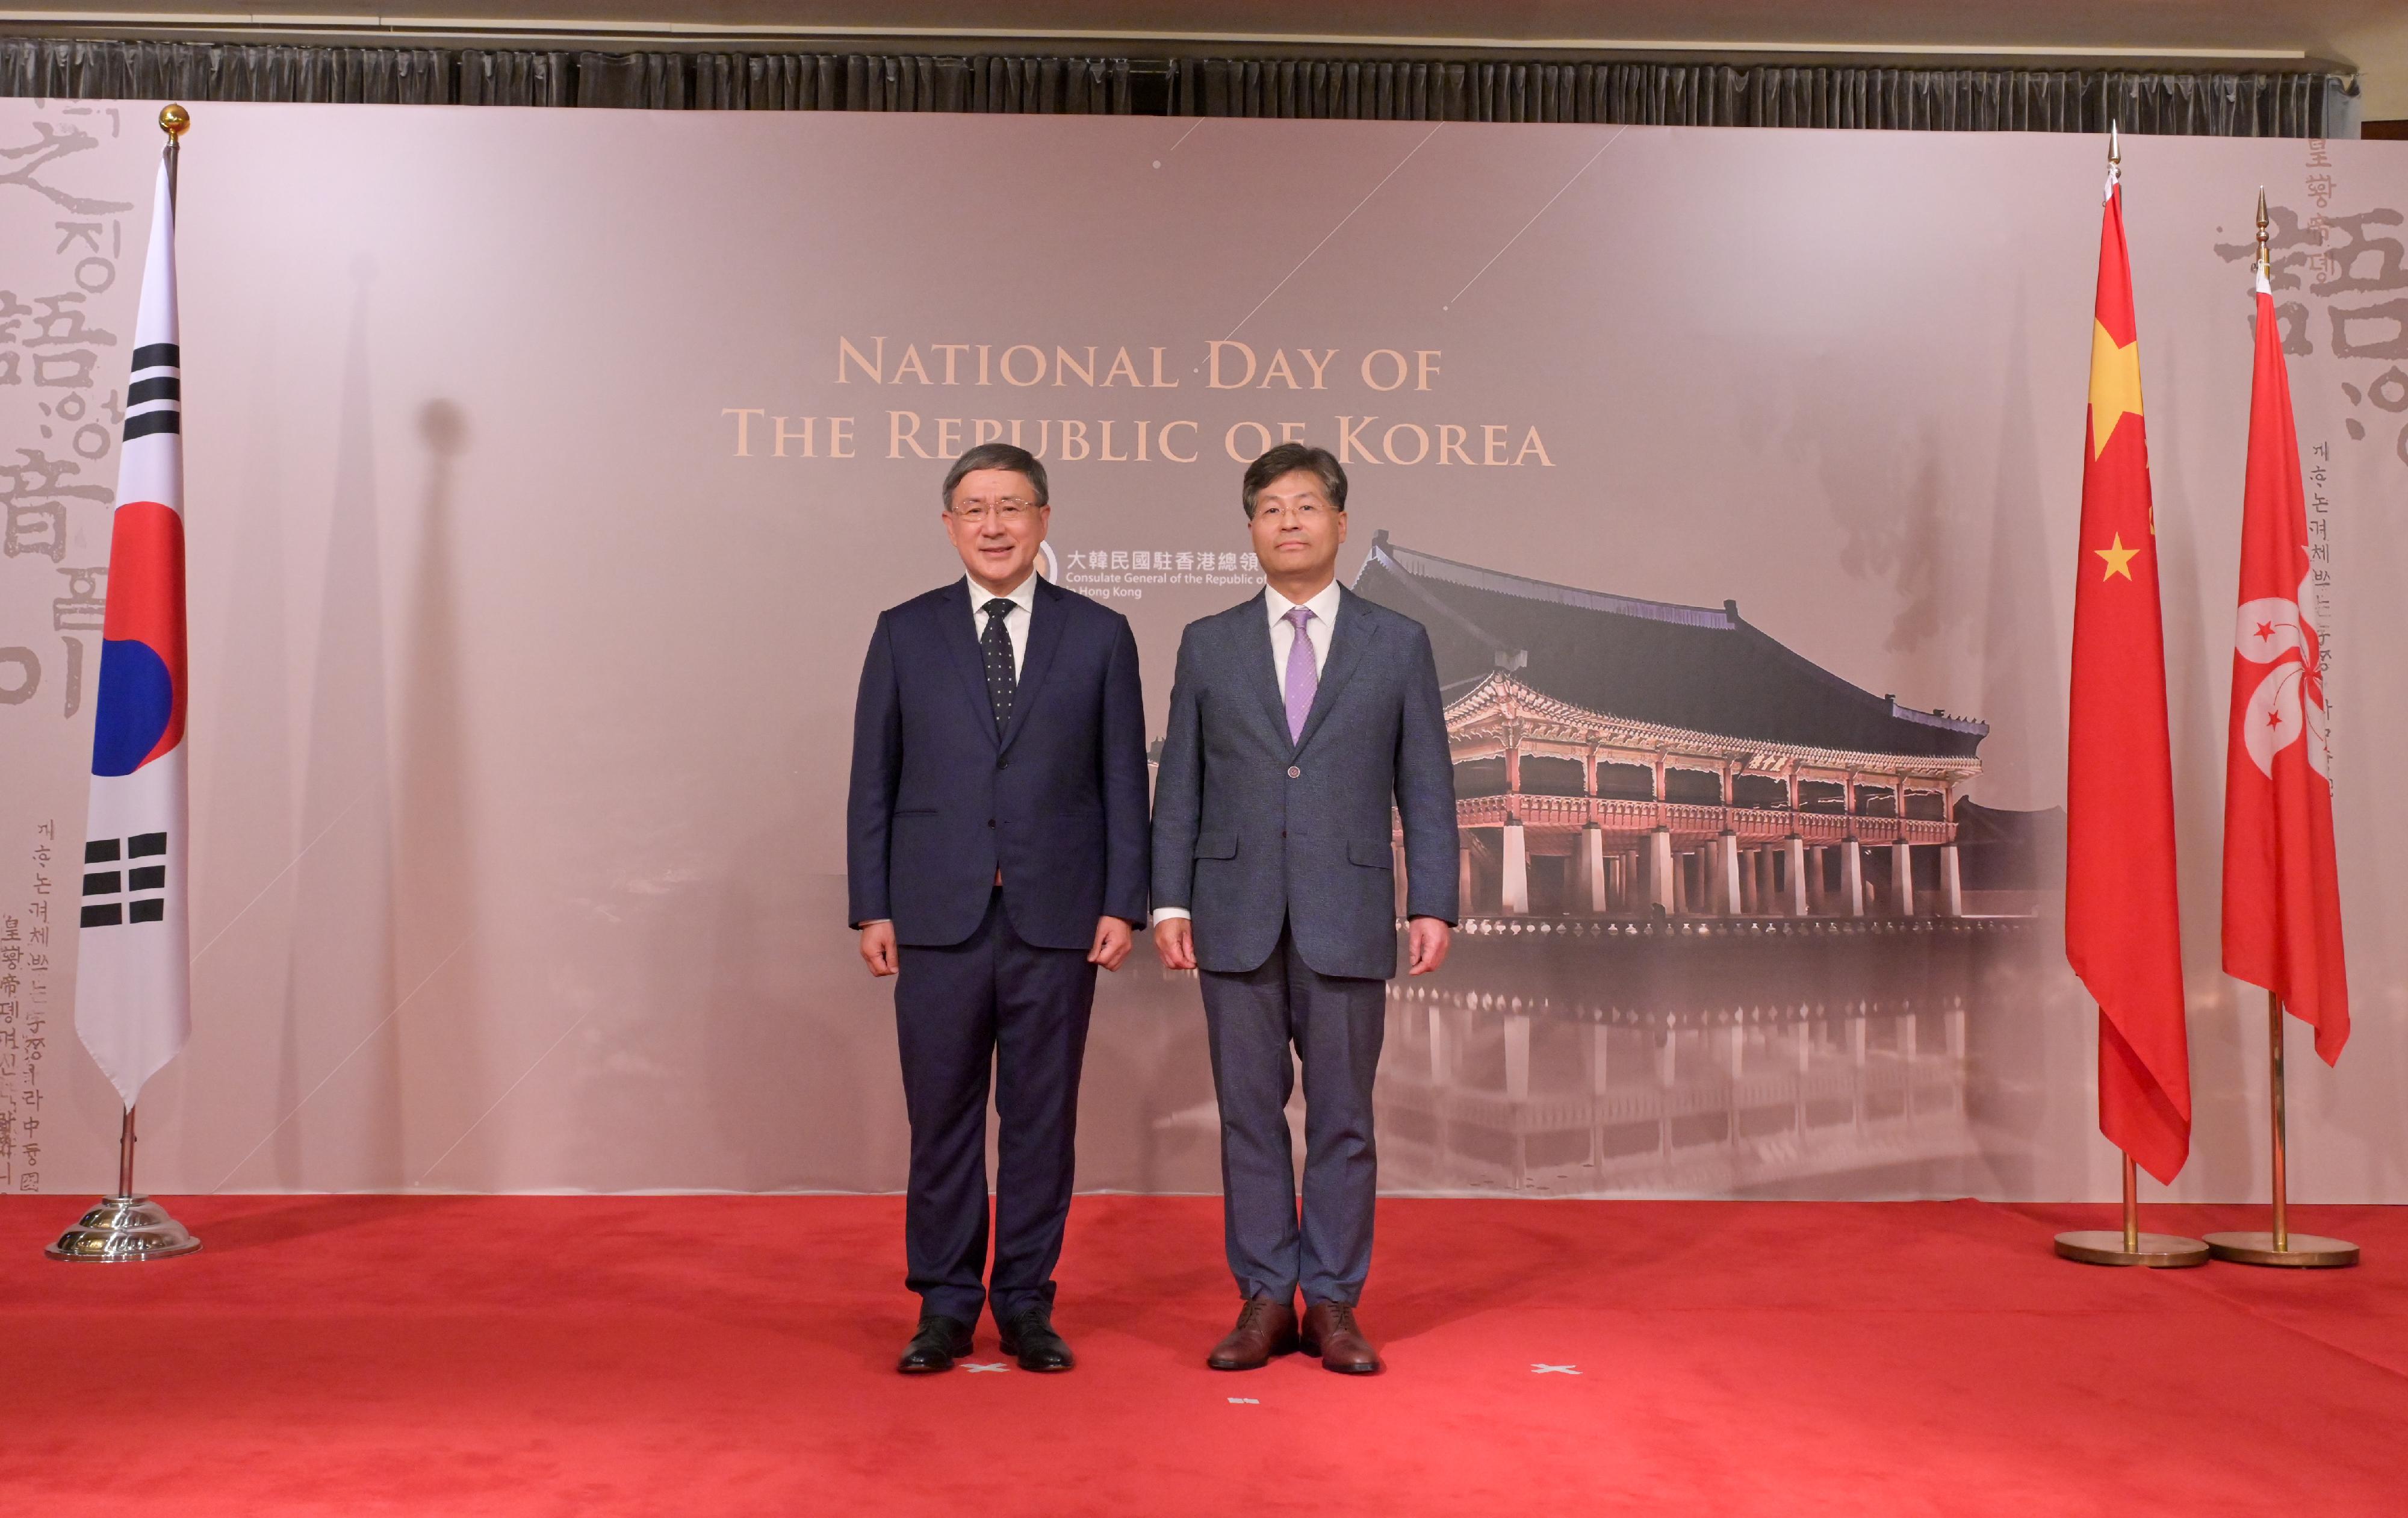 The Deputy Chief Secretary for Administration, Mr Cheuk Wing-hing (left), and the Consul General of the Republic of Korea in Hong Kong, Mr Yoo Hyungcheol (right), pose for a photo at the National Day of the Republic of Korea reception today (October 19).